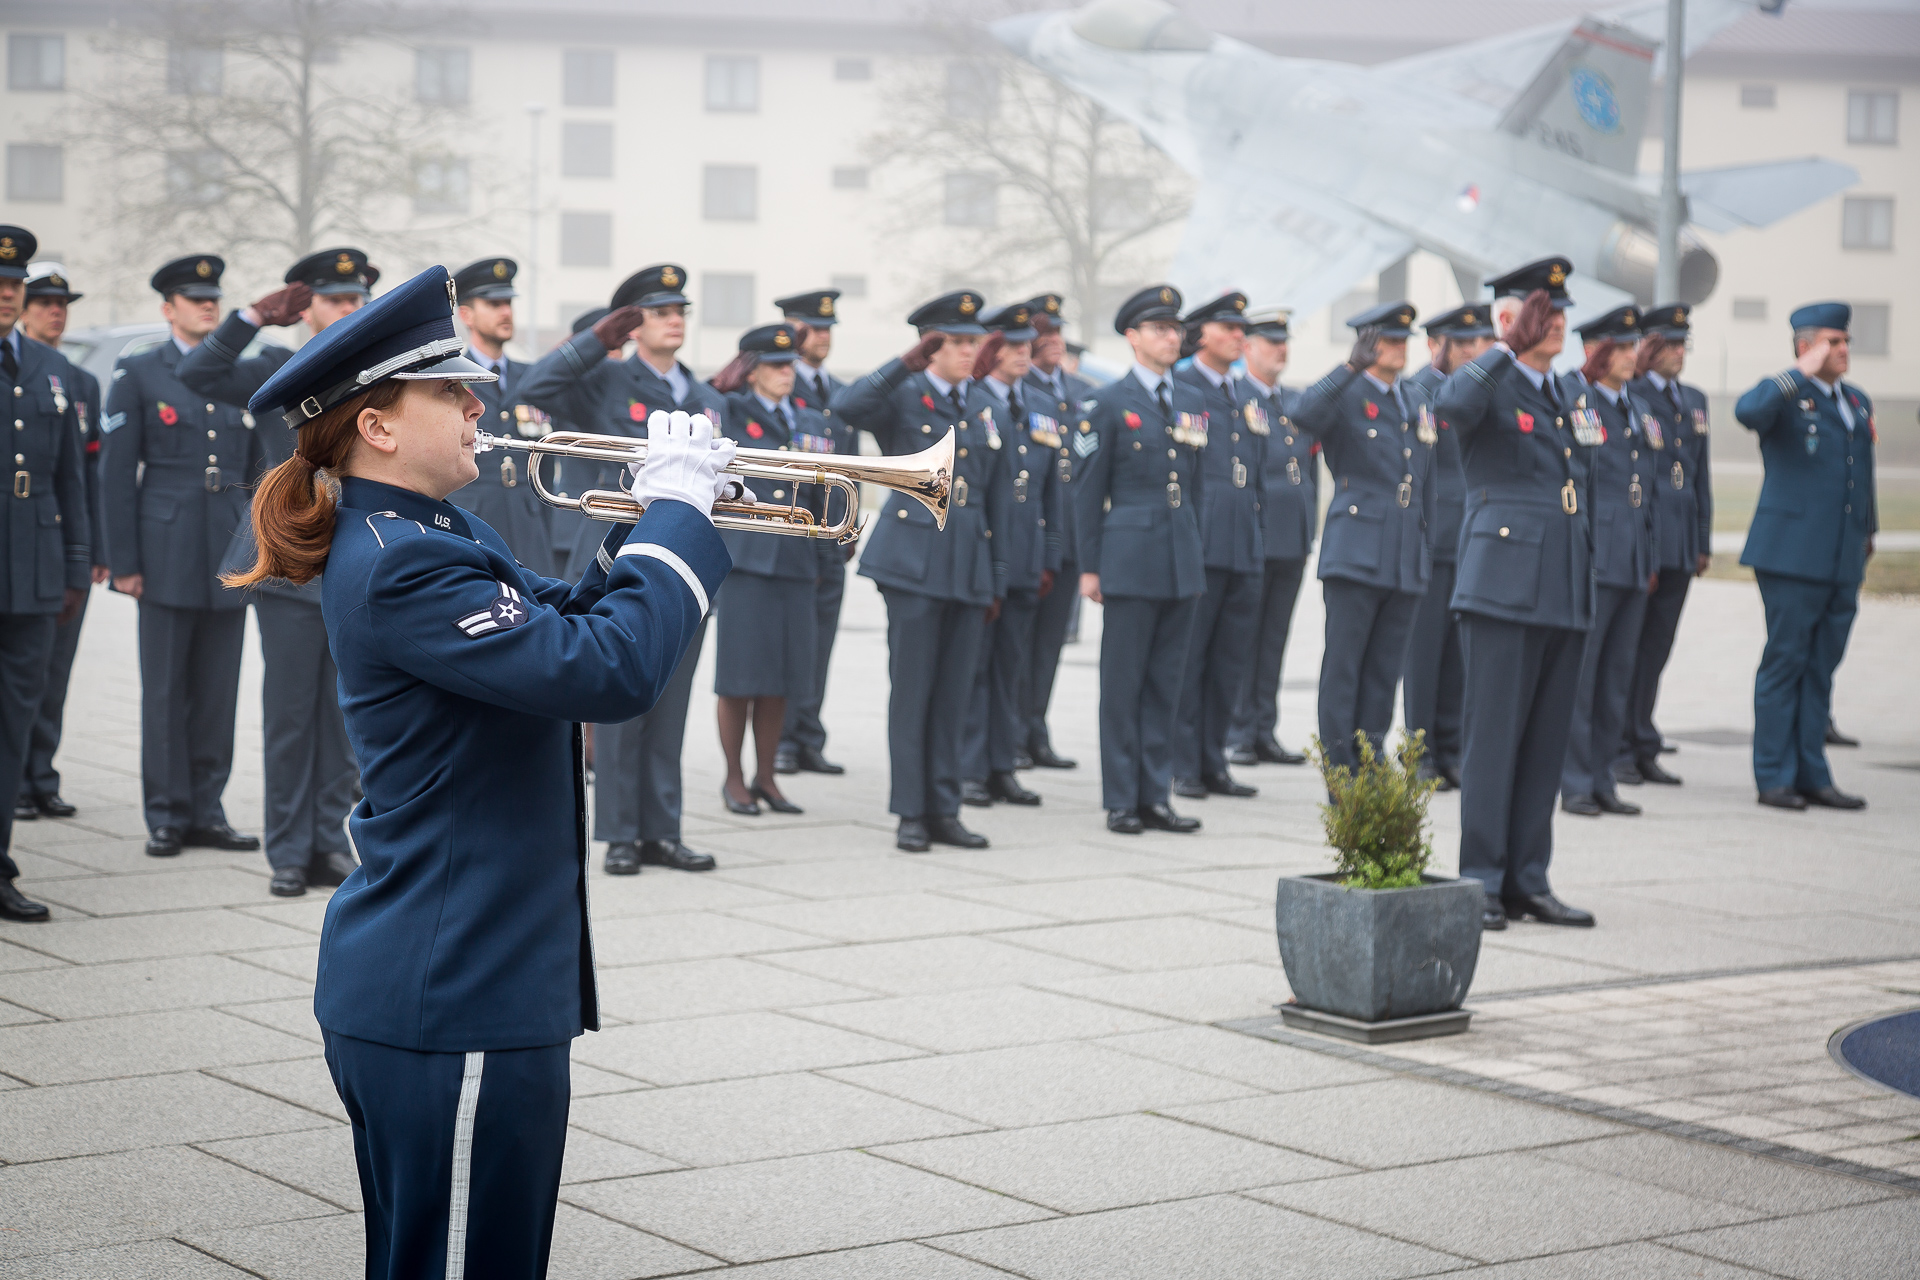 Corporal Hogan plays the bugle while personnel in parade salute. Model aircraft in the background.